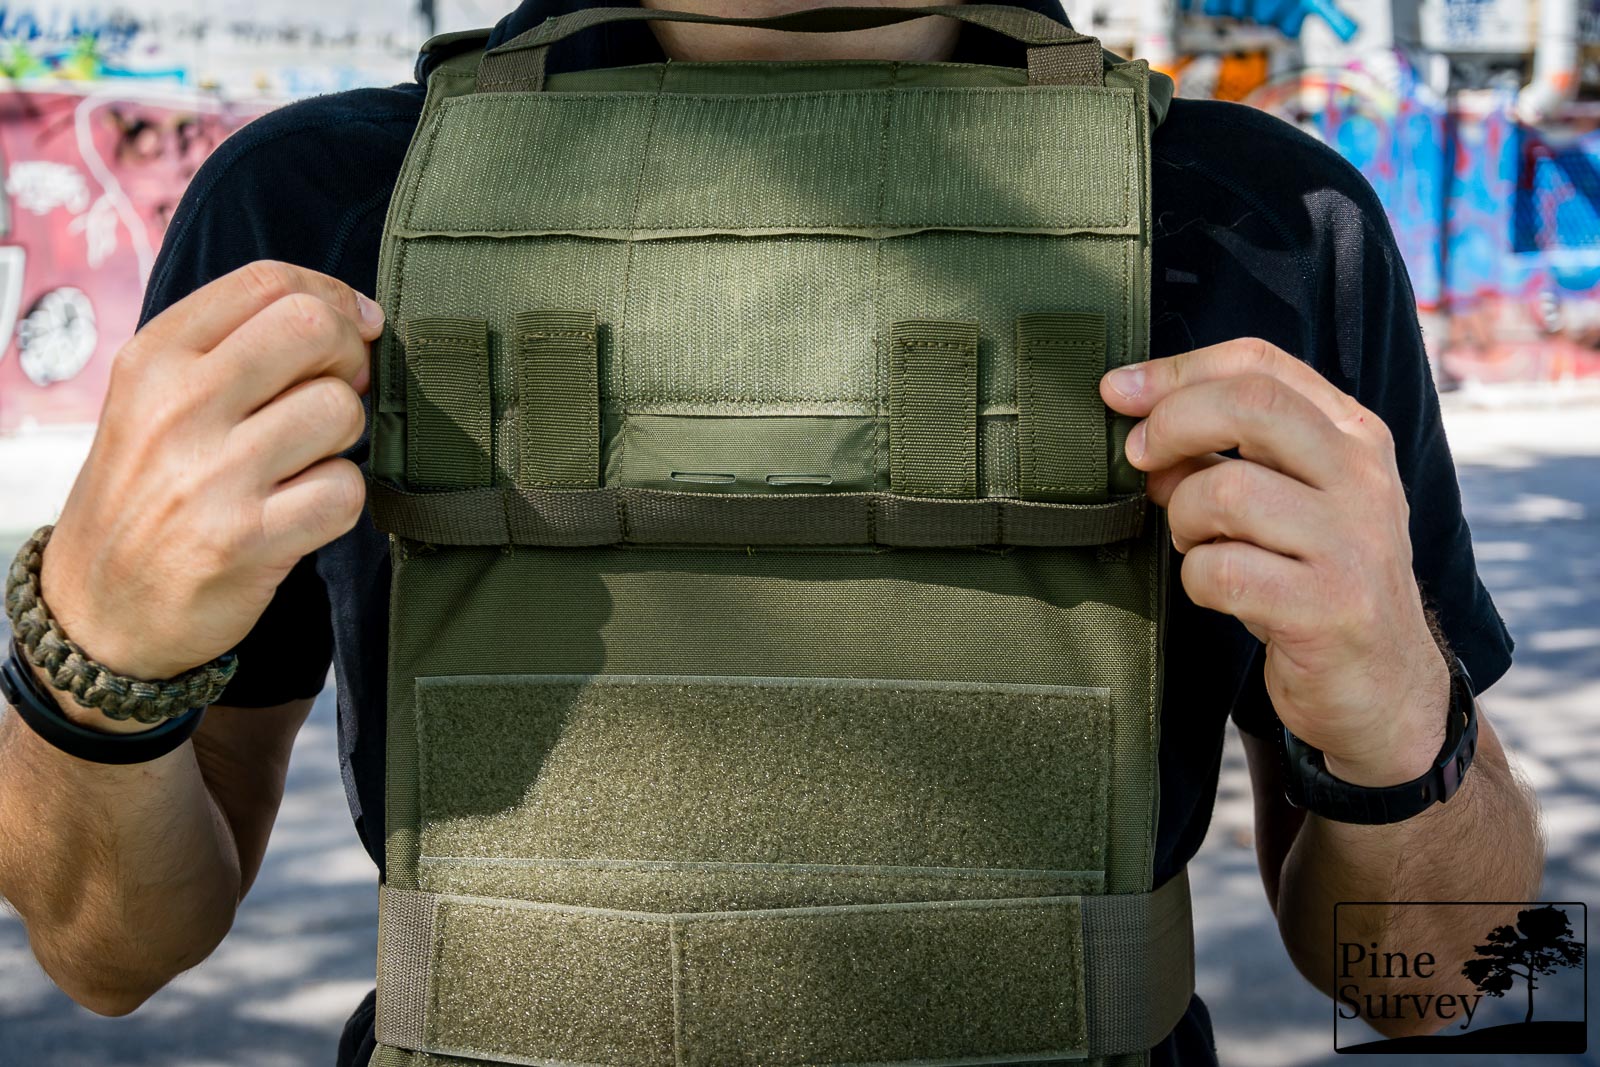 The MOLLE front panel lifted up, showing its attachment